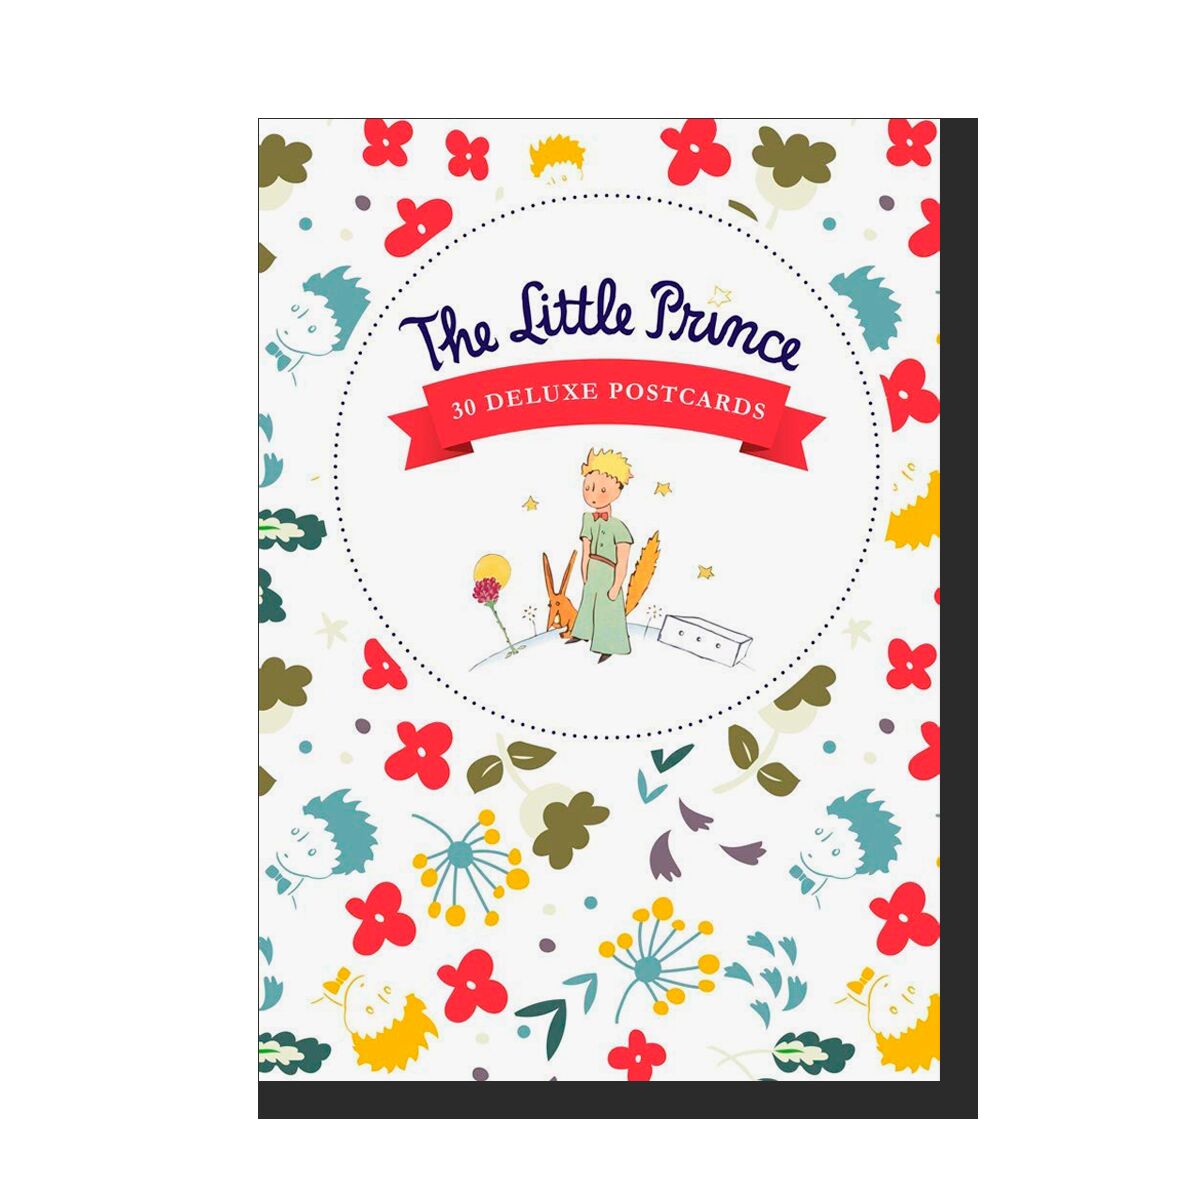 The Little Prince: 30 Deluxe Postcards